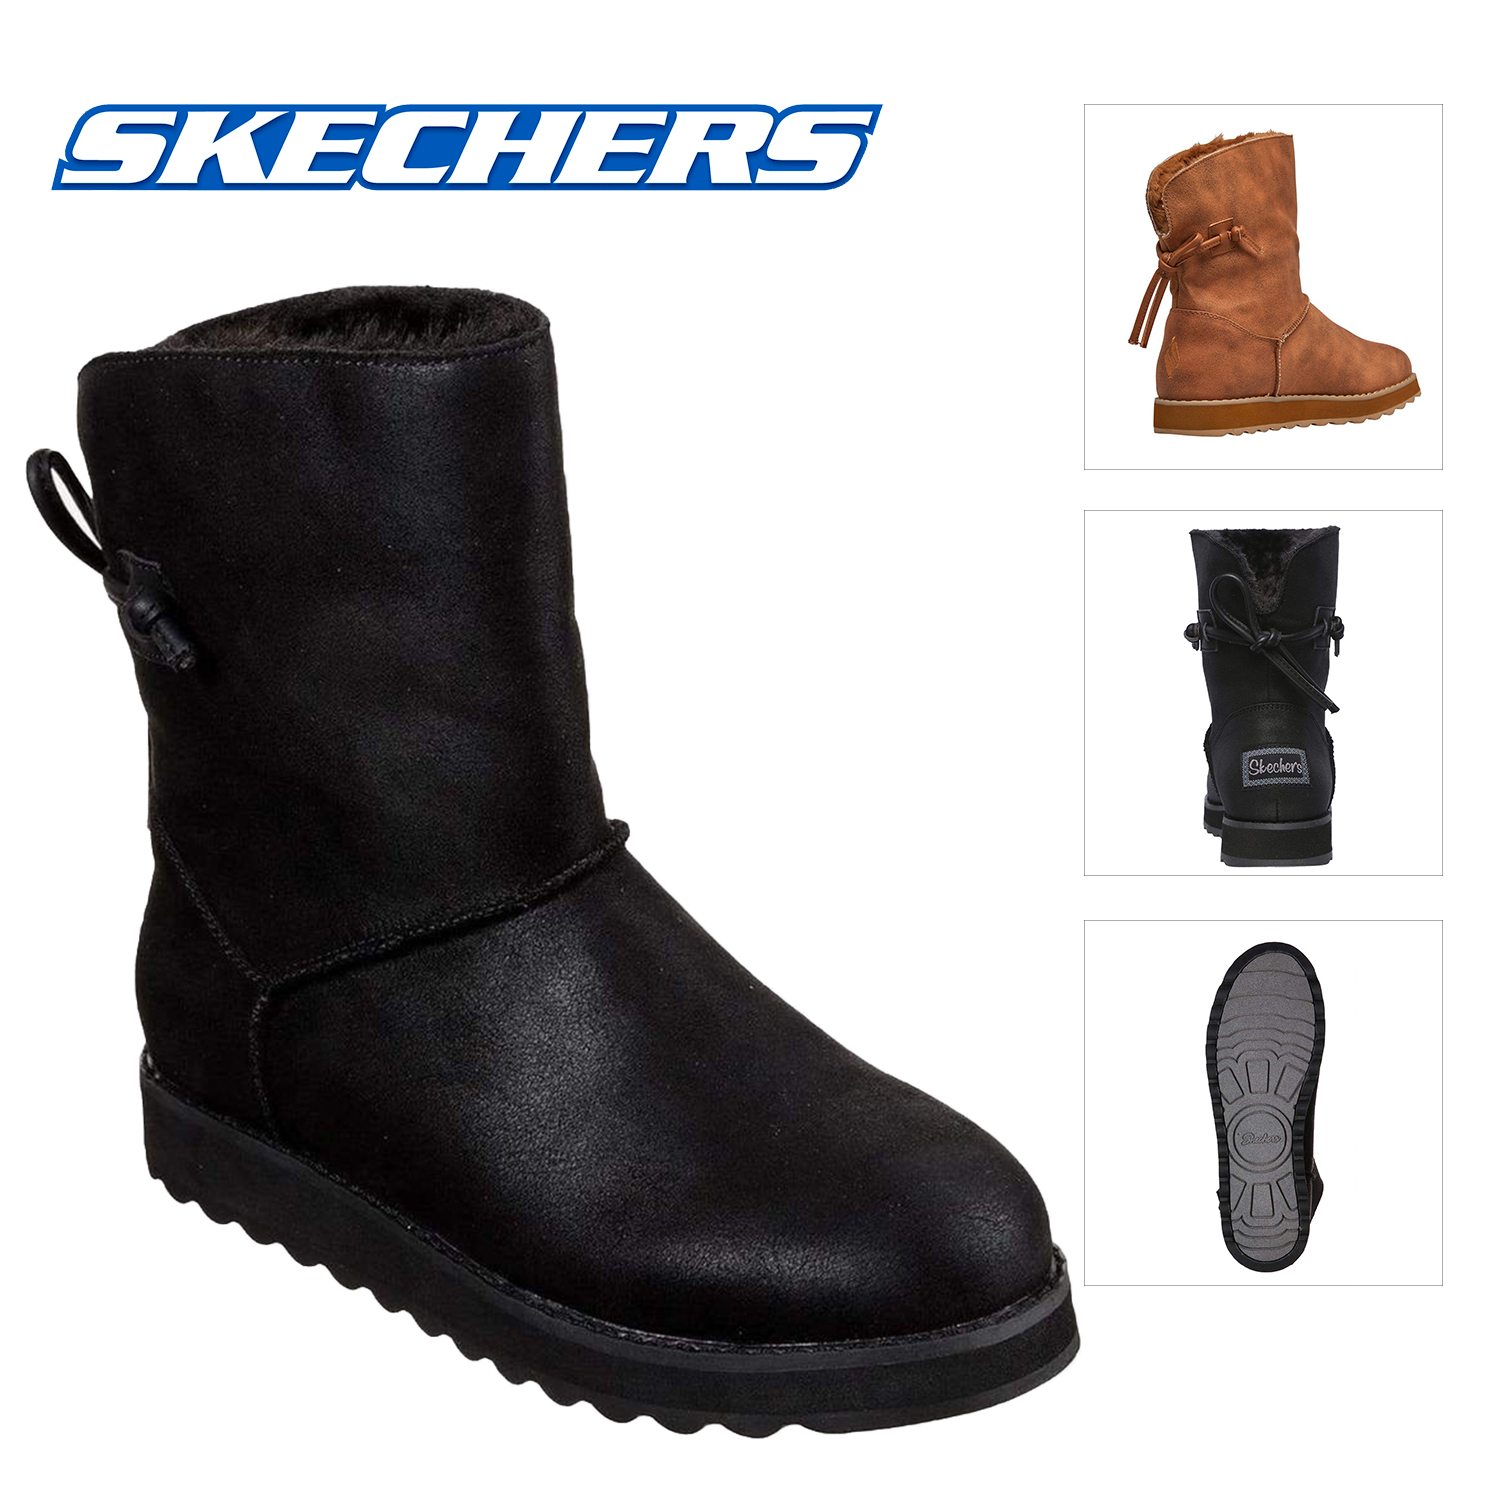 leather skechers boots